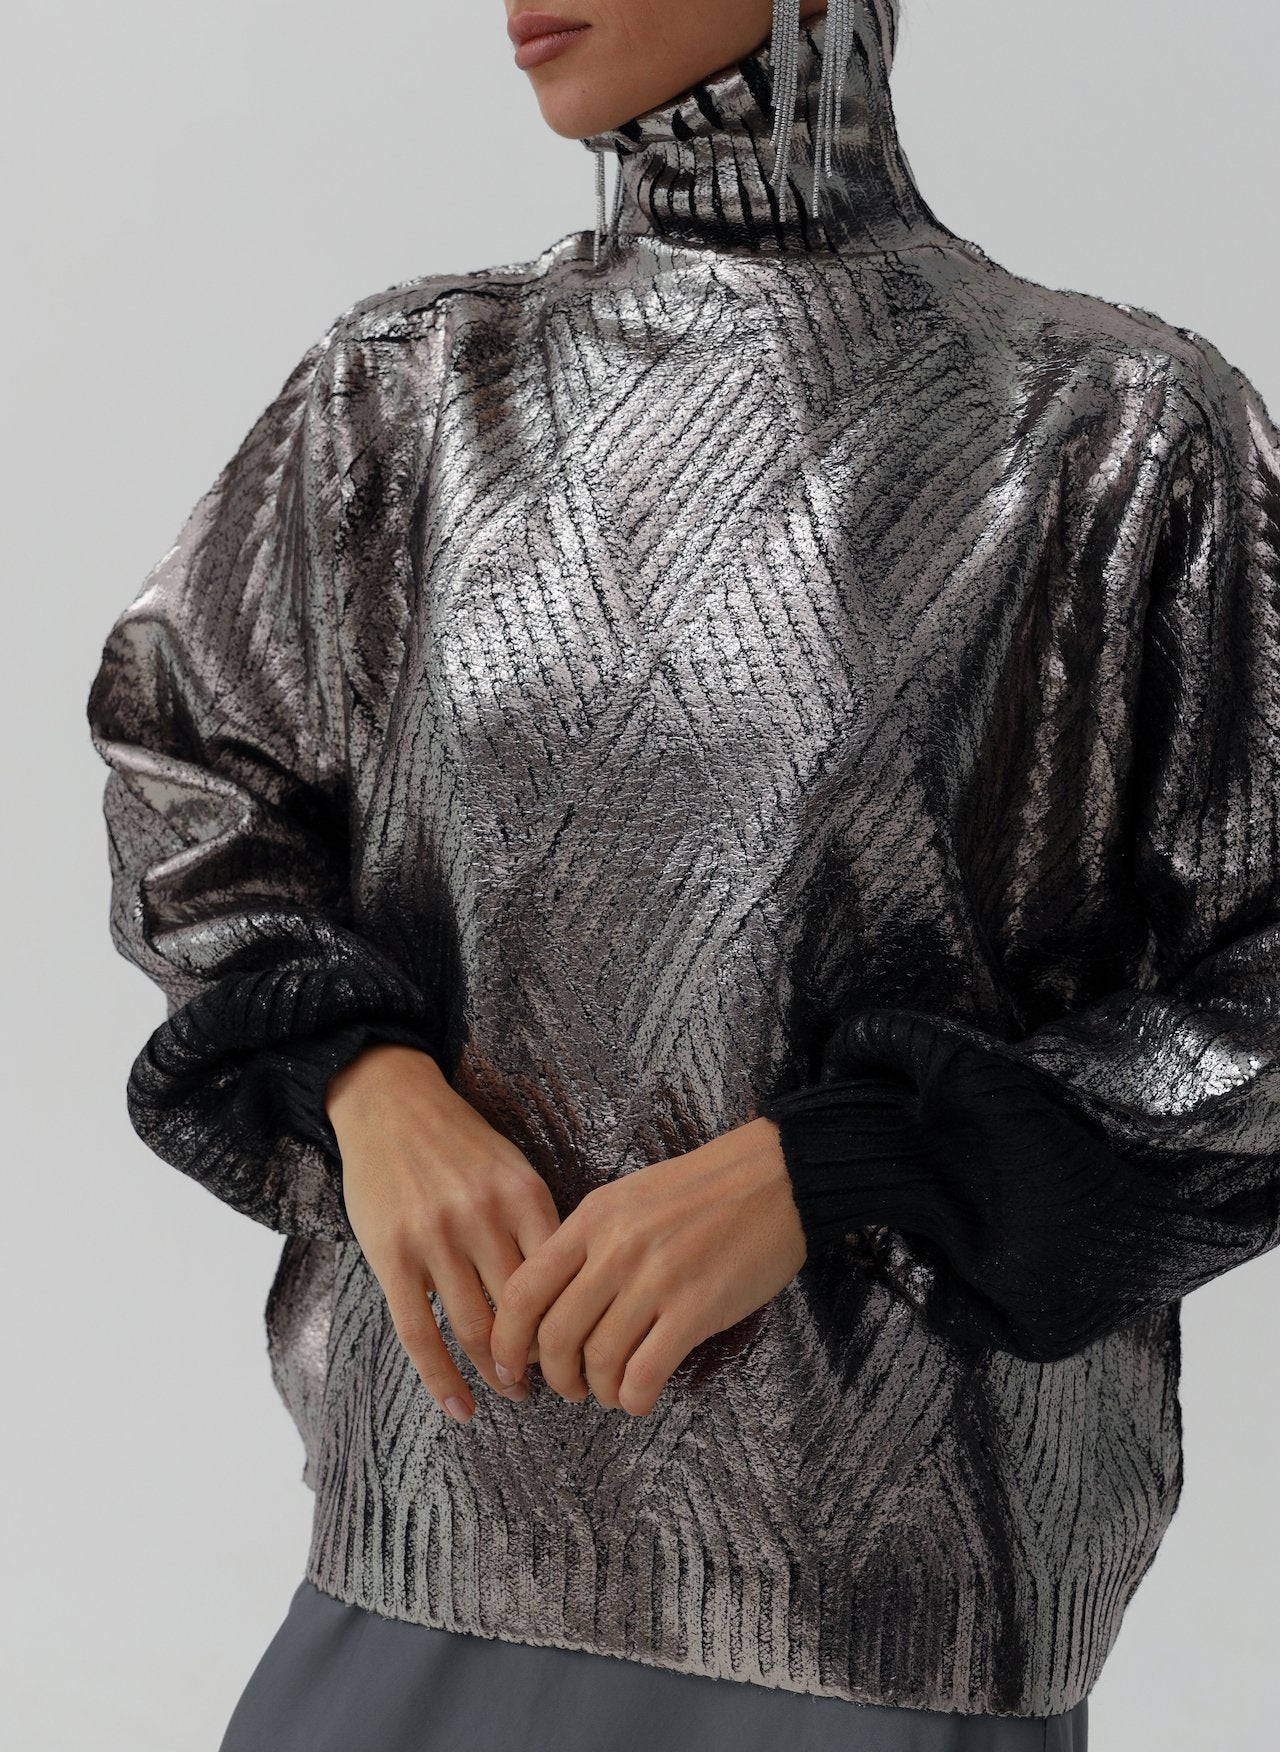 REFLECTIVE KNITTED SWEATER